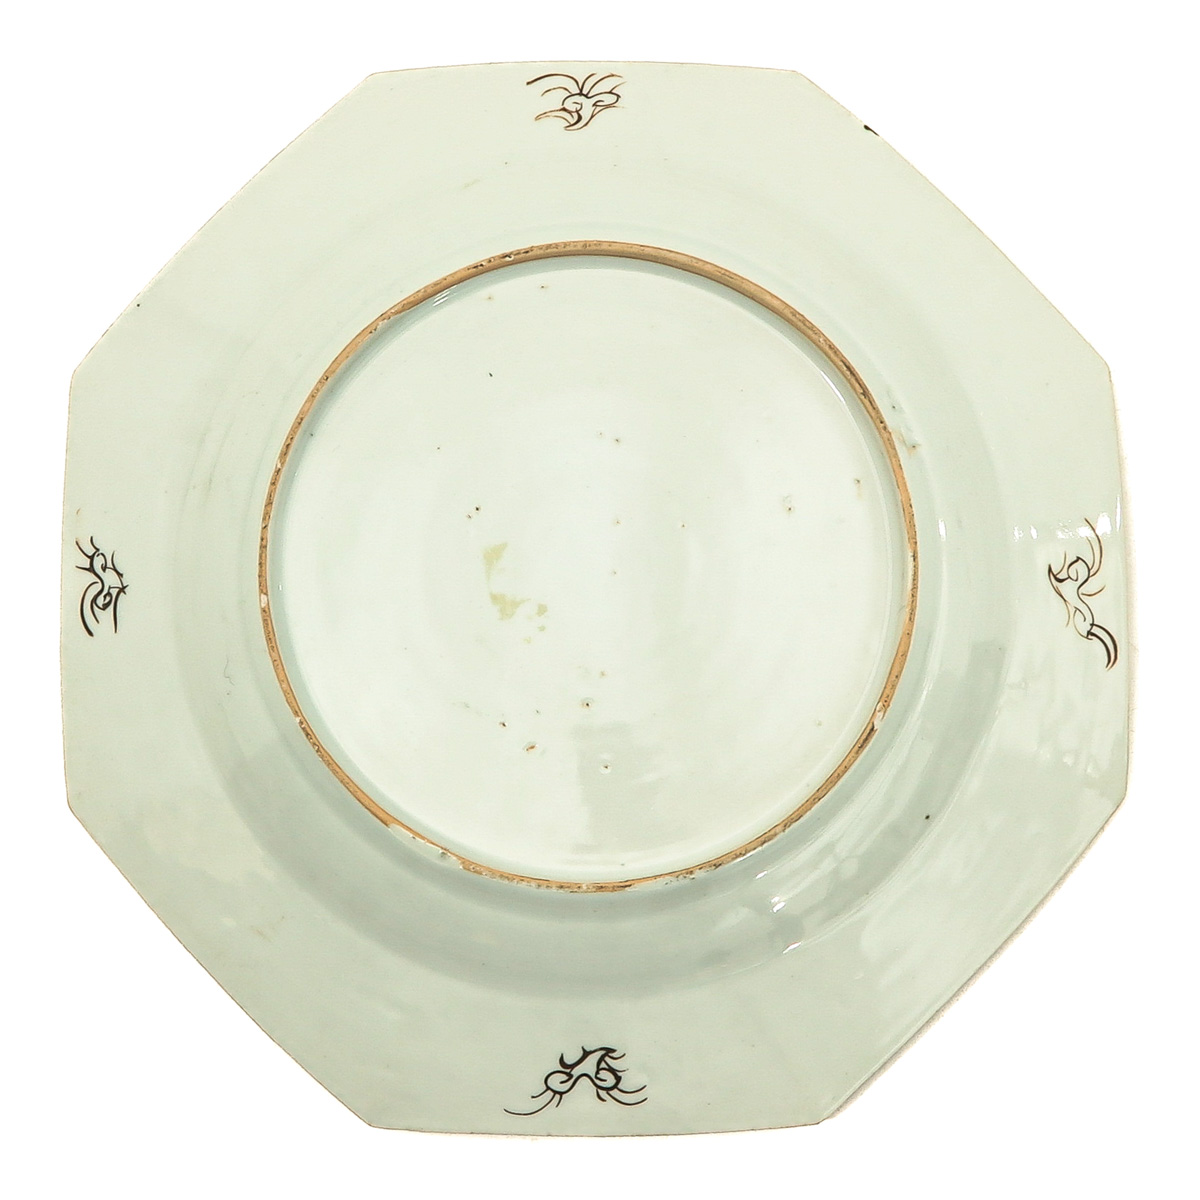 A Series of 3 Famille Rose Plates - Image 8 of 10